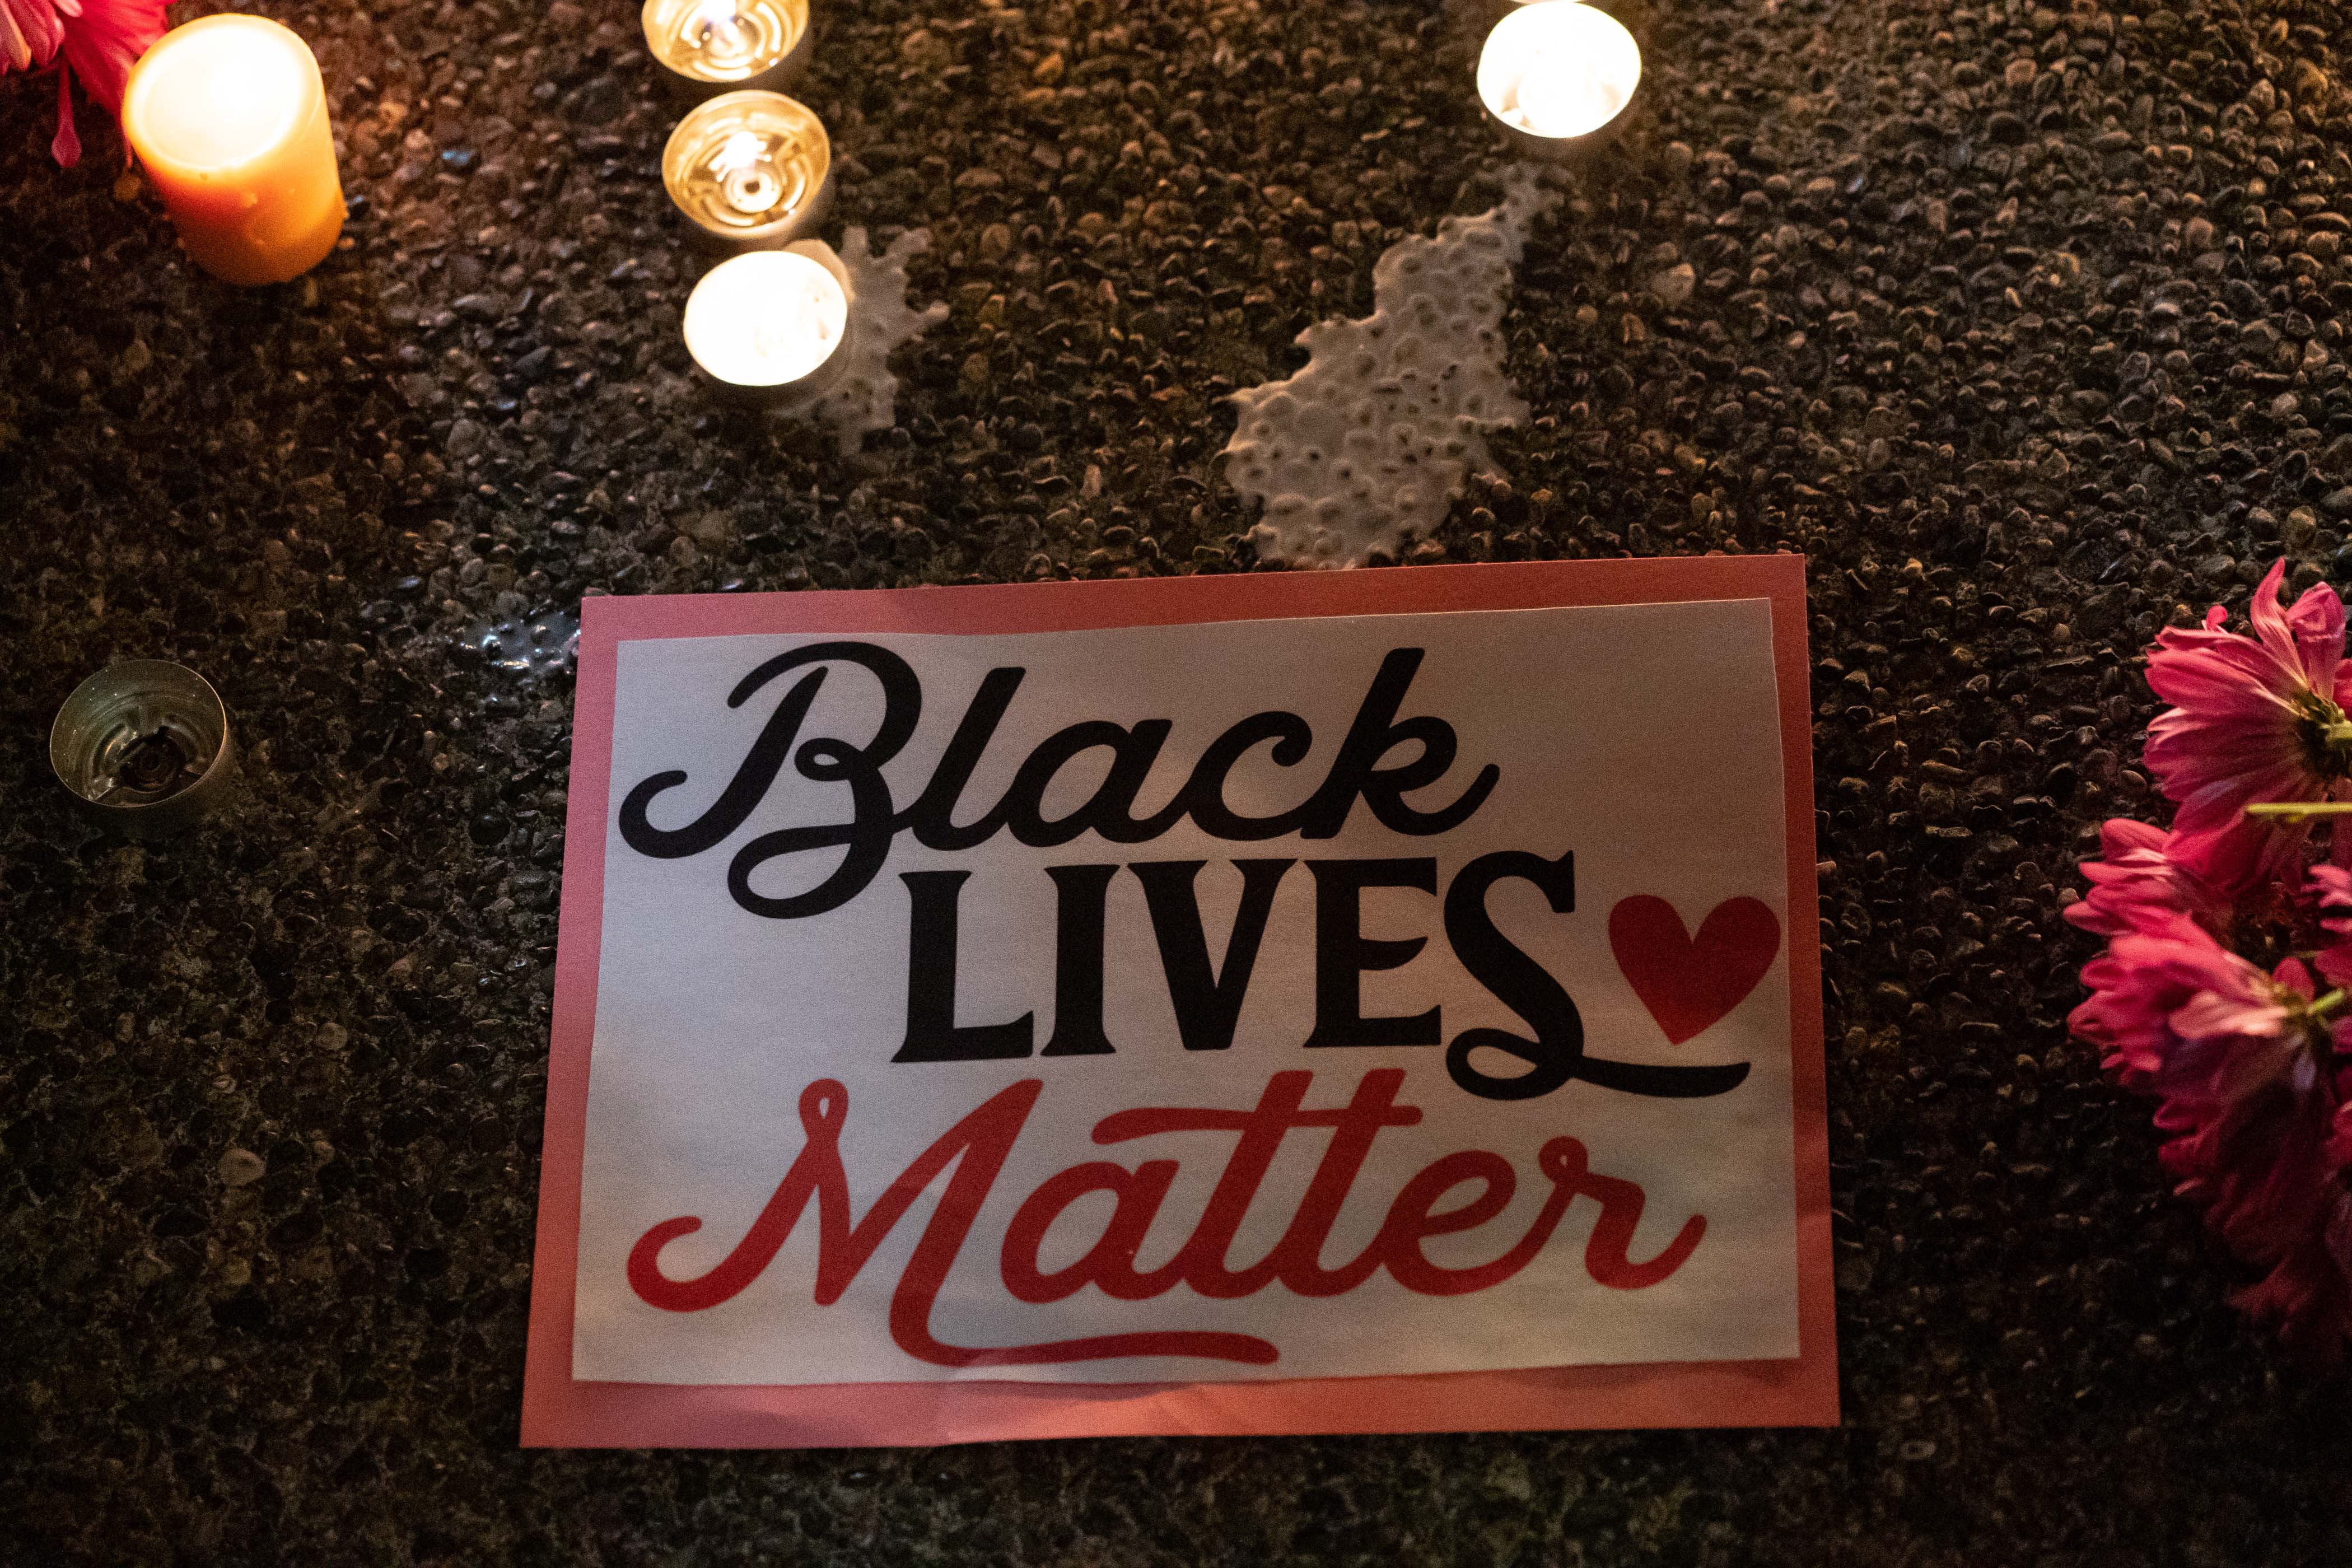 A sign on the ground saying "Black Lives Matter," surrounded by flowers and candles.